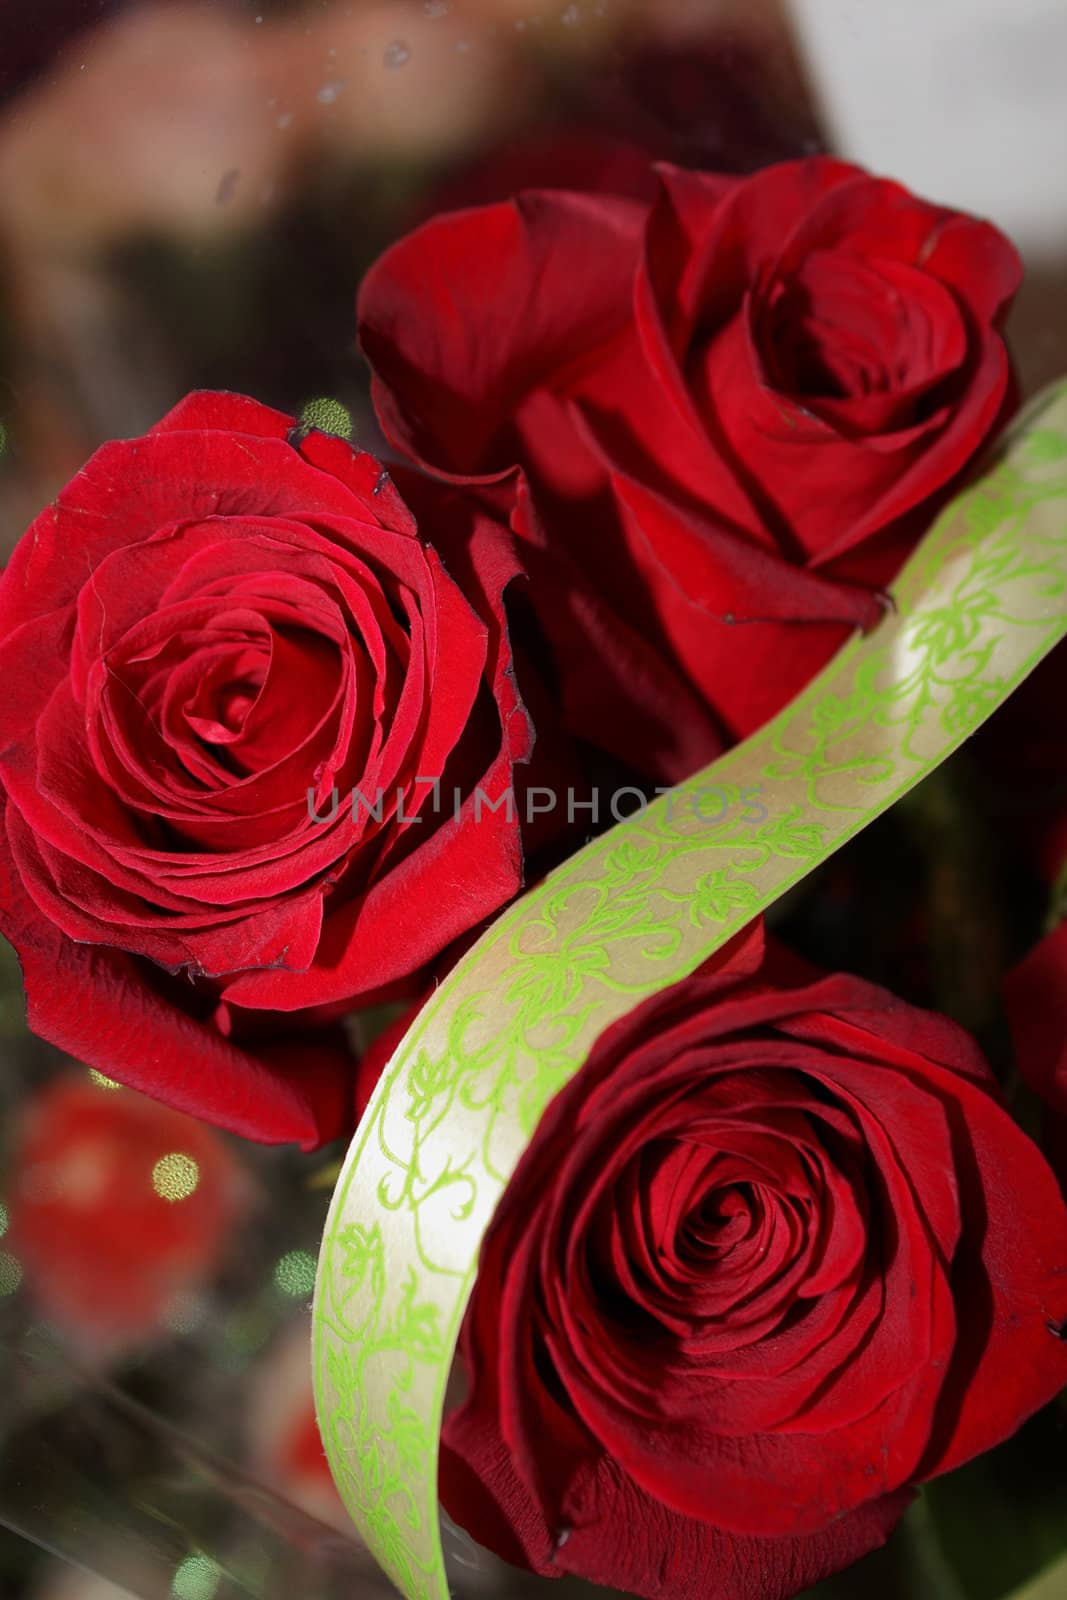 Red roses in the wedding bouquet by pulen